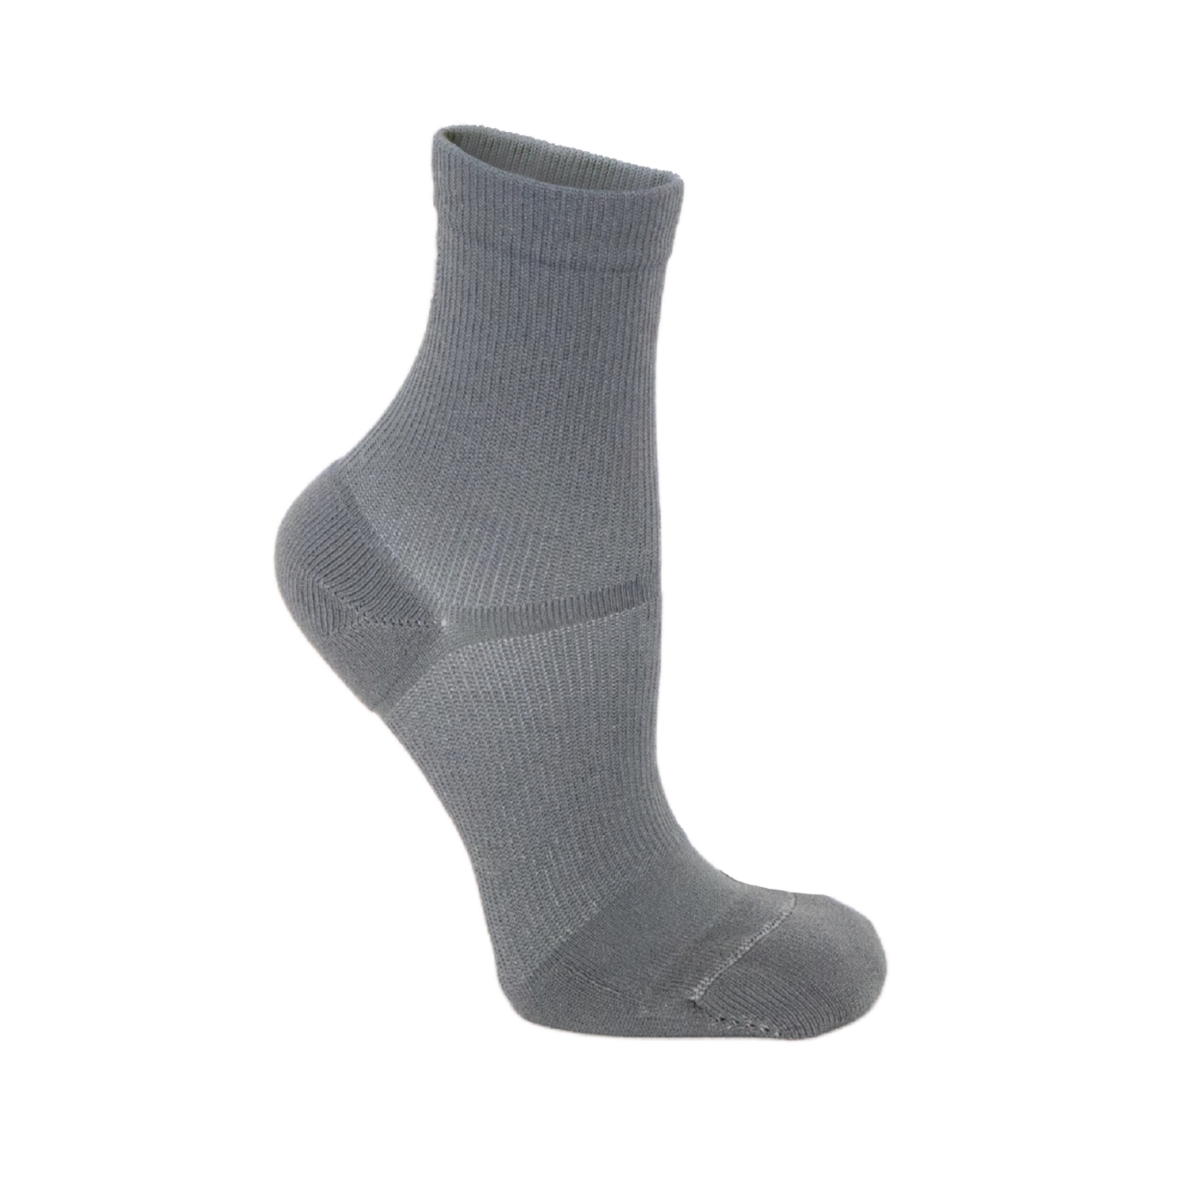 Women's The Performance: Crew Profile Padded Compression Arch & Ankle Support Socks - Grey